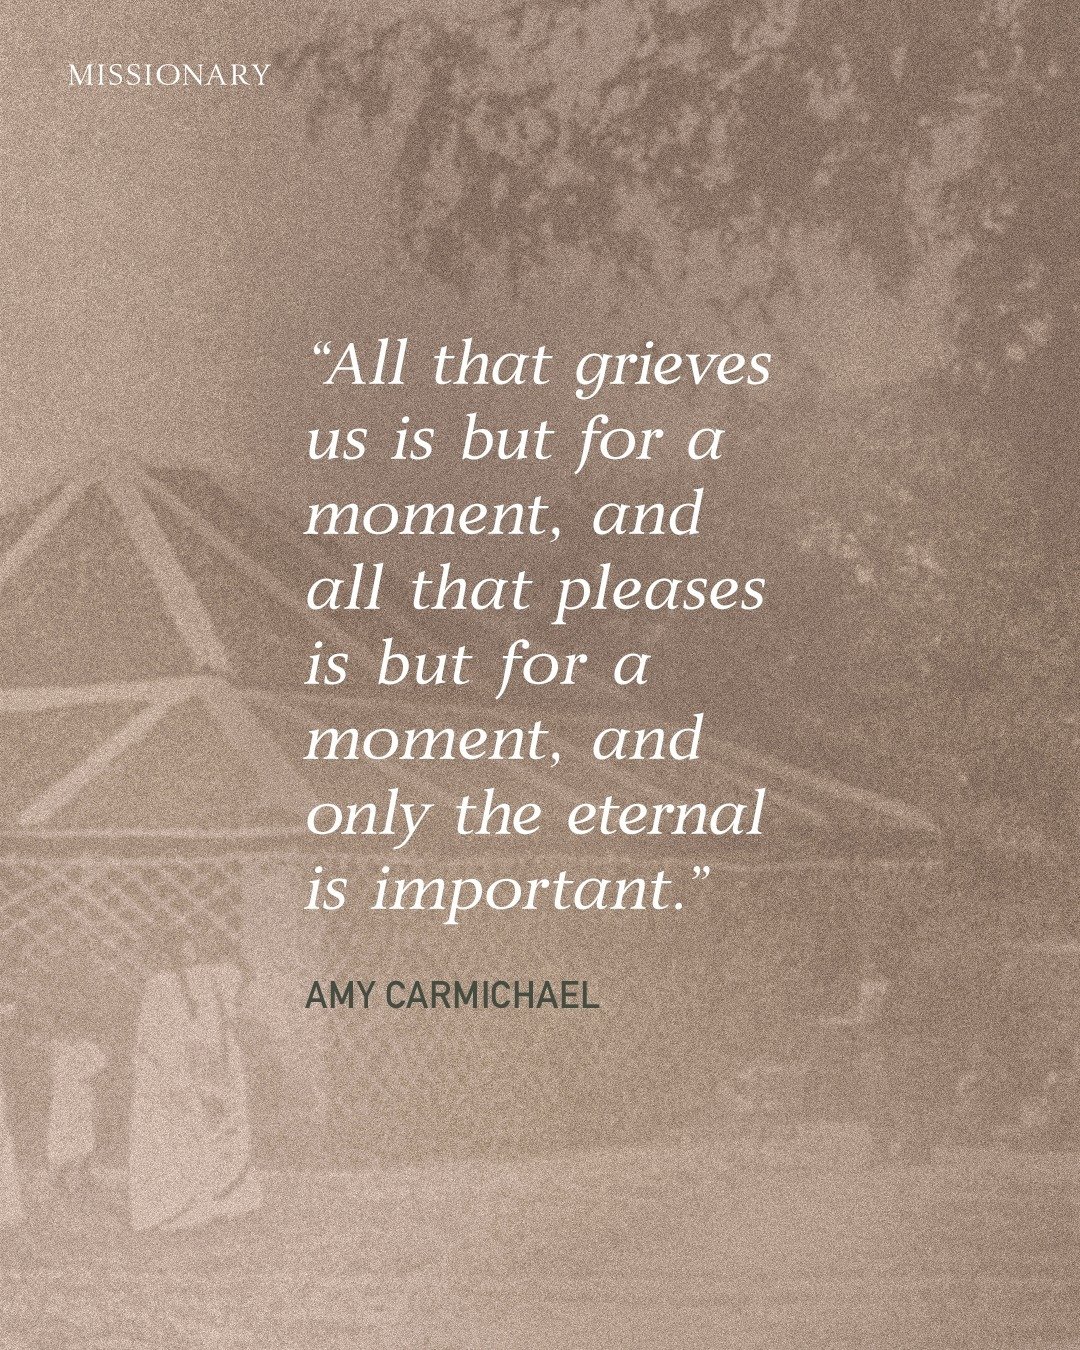 &ldquo;All that grieves us is but for a moment, and all that pleases is but for a moment, and only the eternal is important.&rdquo; ― Amy Carmichael